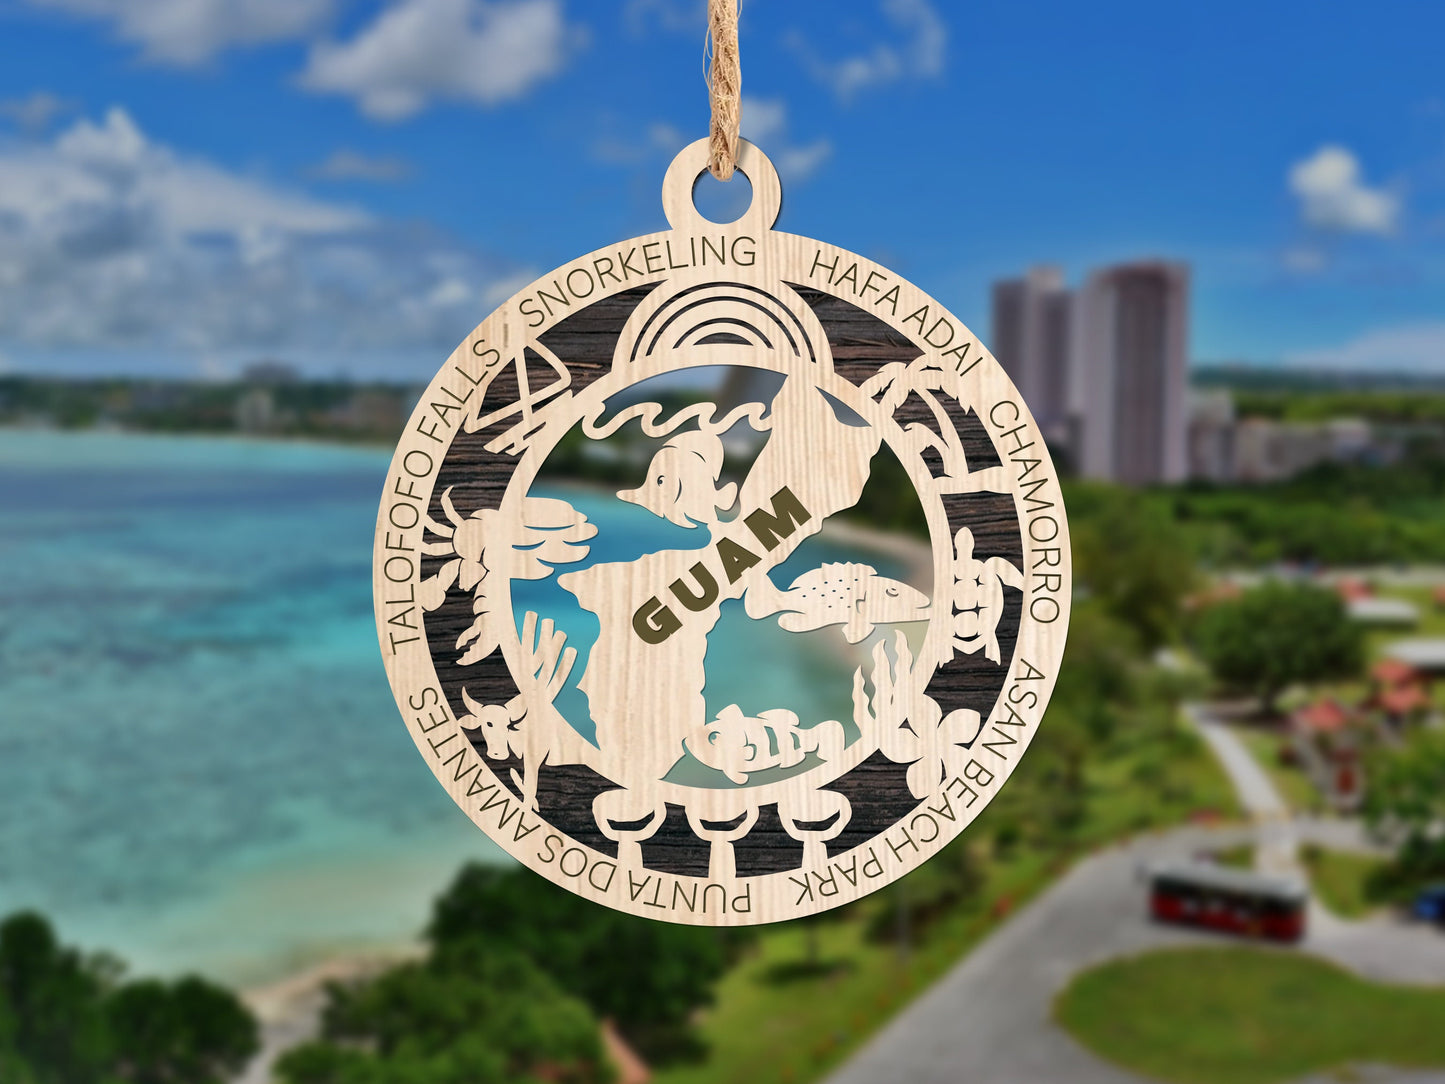 Guam Ornament - SVG File Download - Sized for Glowforge - Laser Ready Digital Files